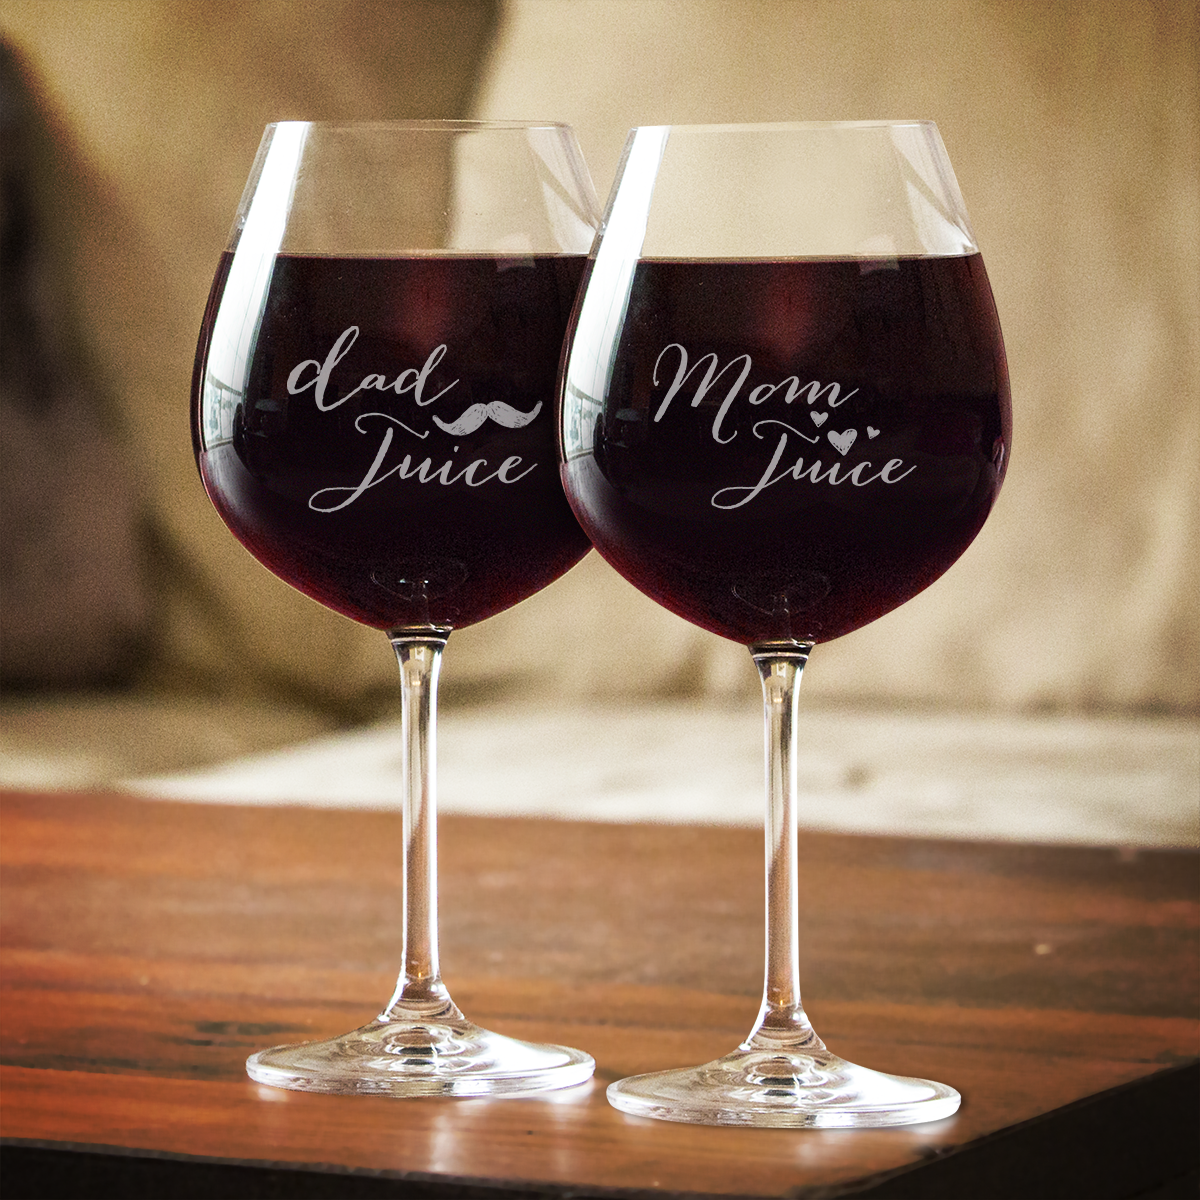 Designs by MyUtopia Shout Out:Mom/Dad Juice Wine Glass Set (Pair) Engraved 20 oz Glass